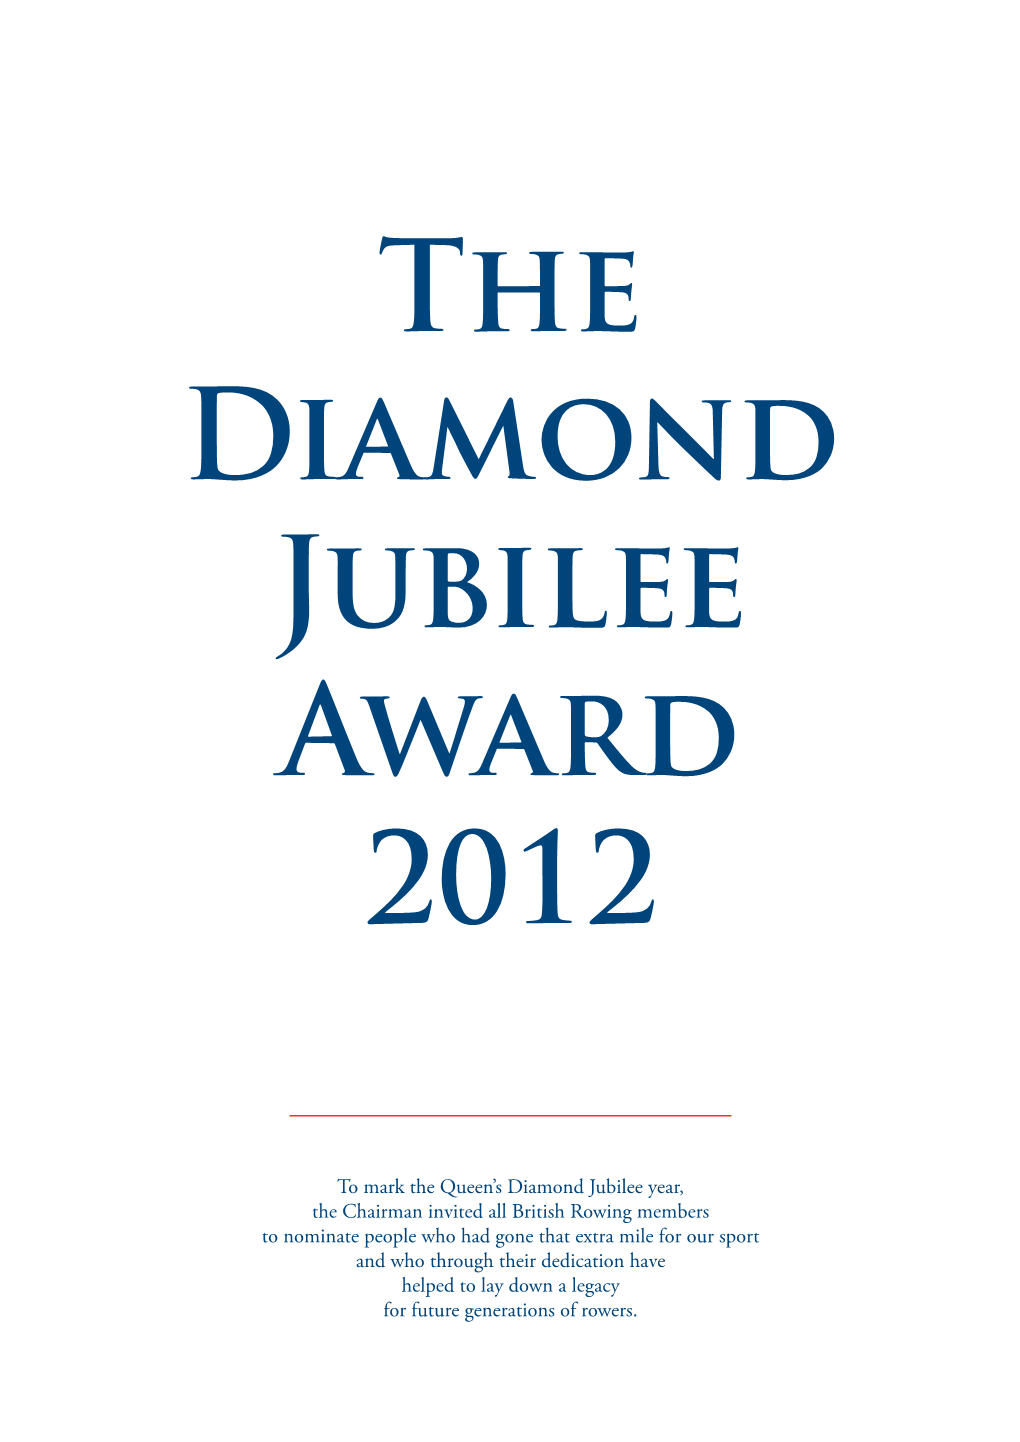 To Mark the Queen's Diamond Jubilee Year, The